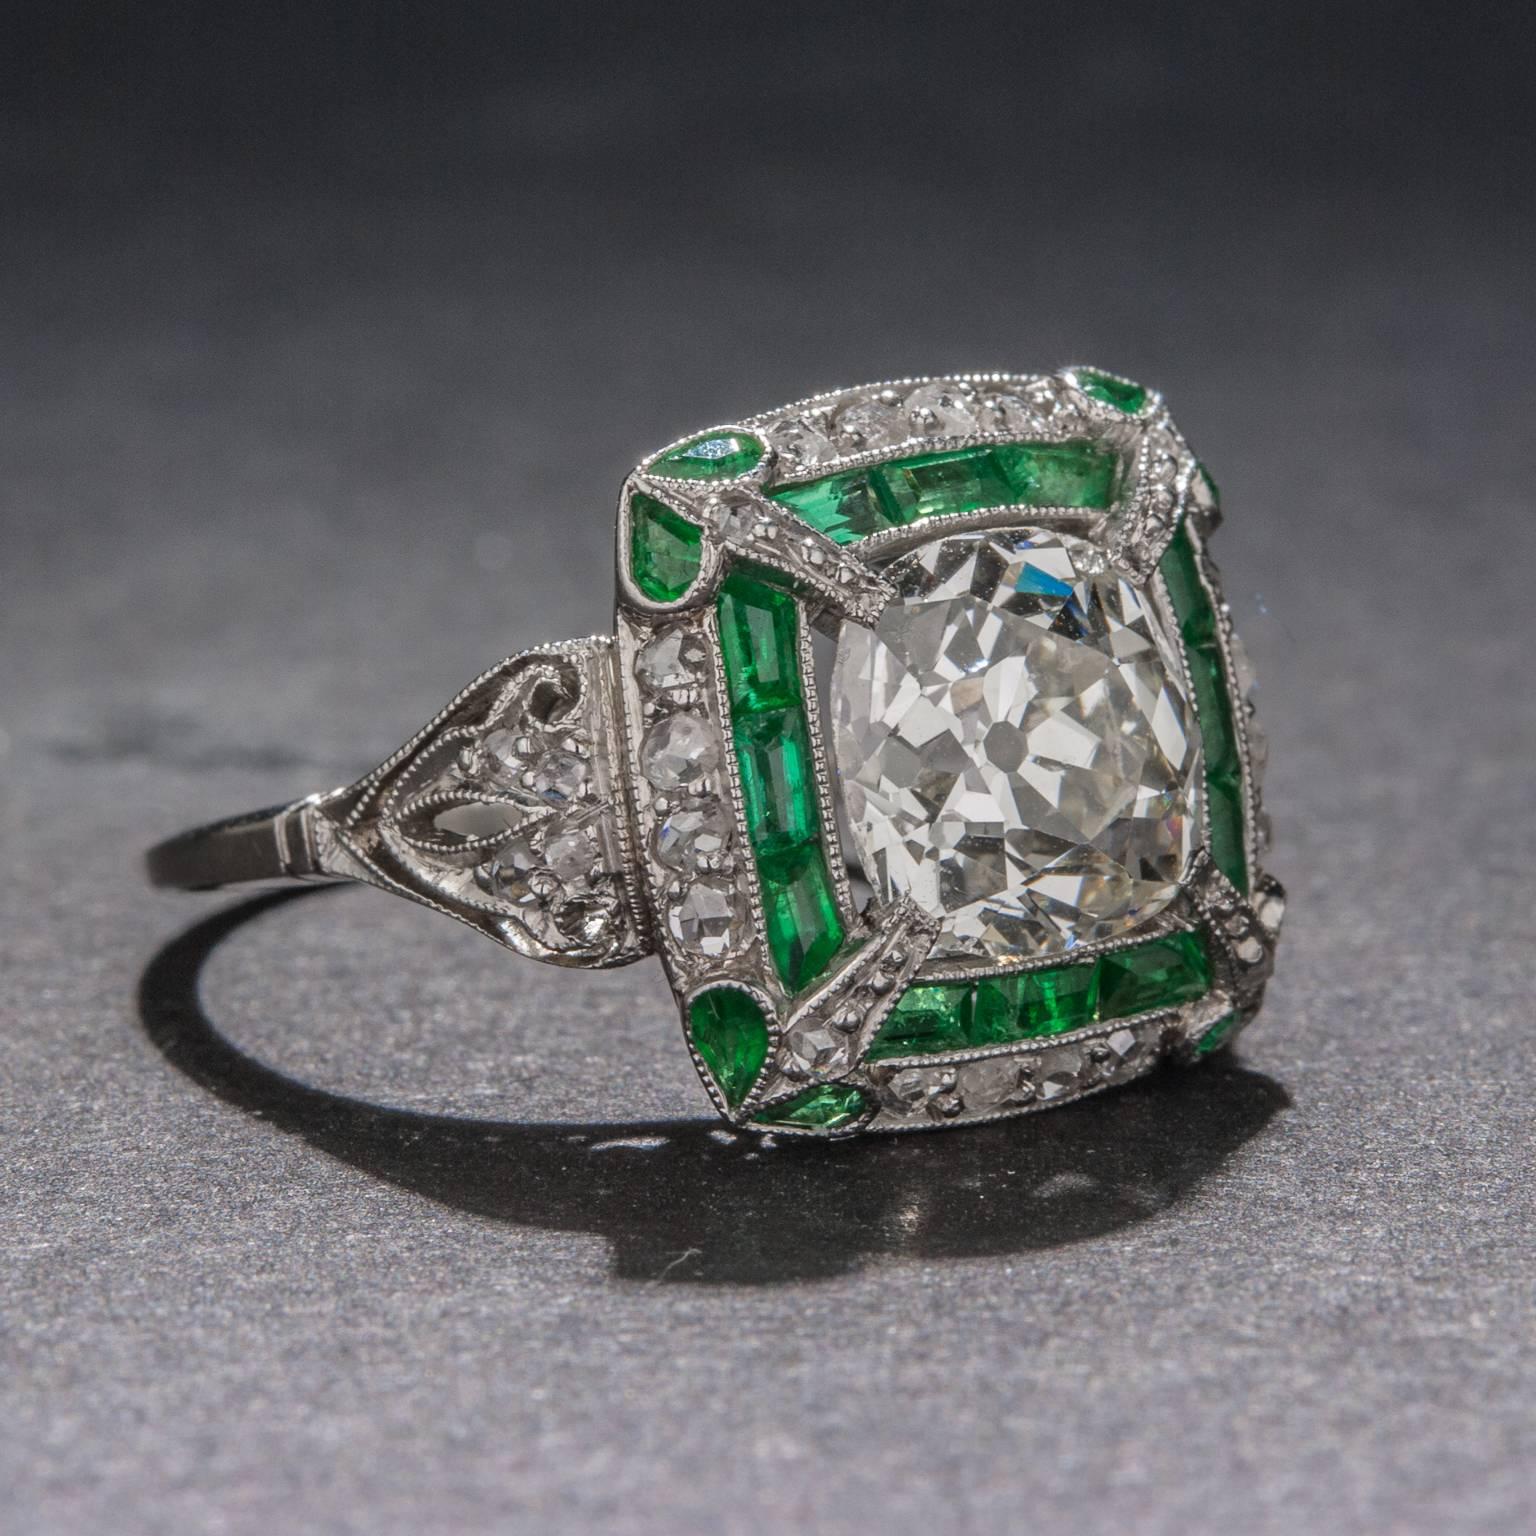 2.50 Carat Diamond and Emerald Ring For Sale at 1stDibs